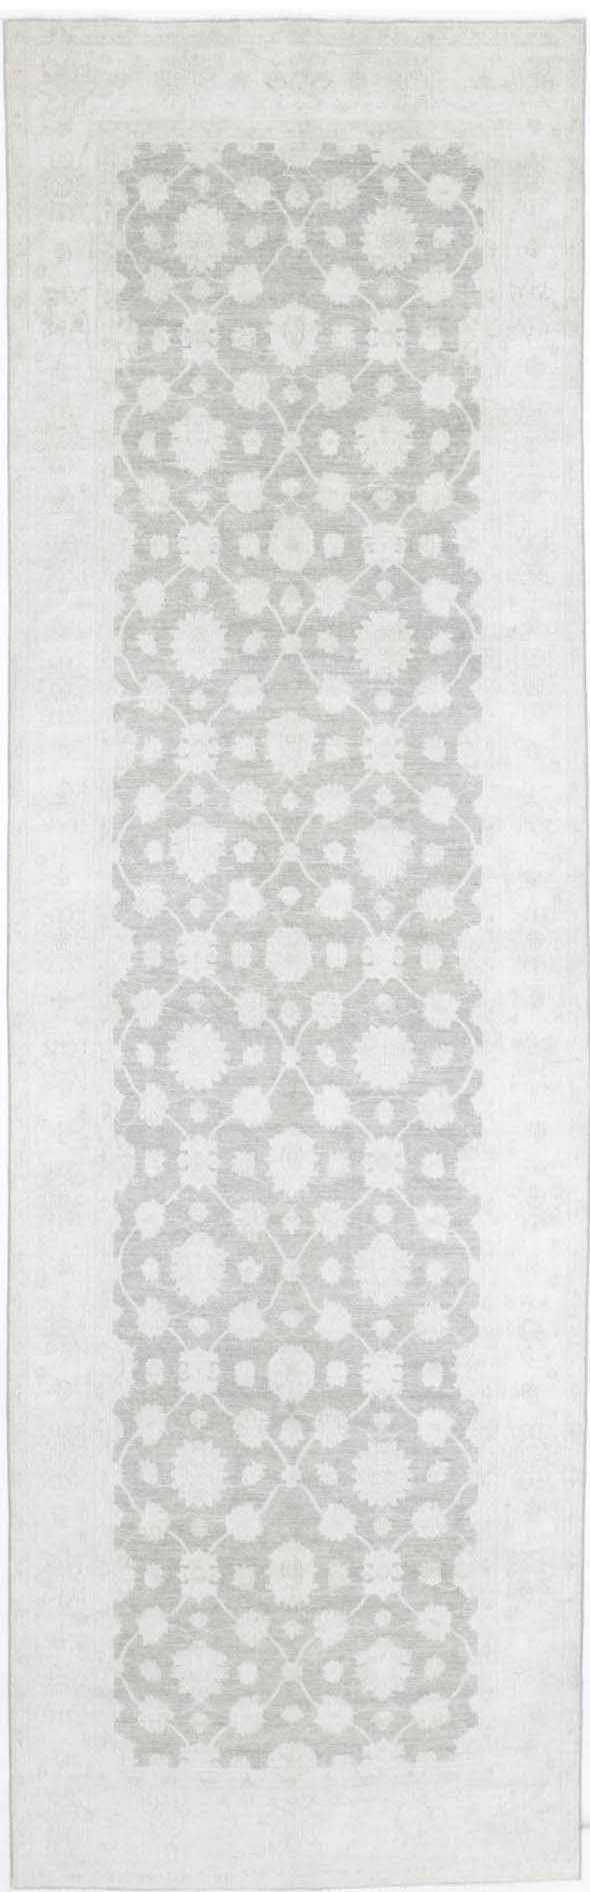 Hand Knotted Serenity Wool Rug - 4'8'' x 16'3''